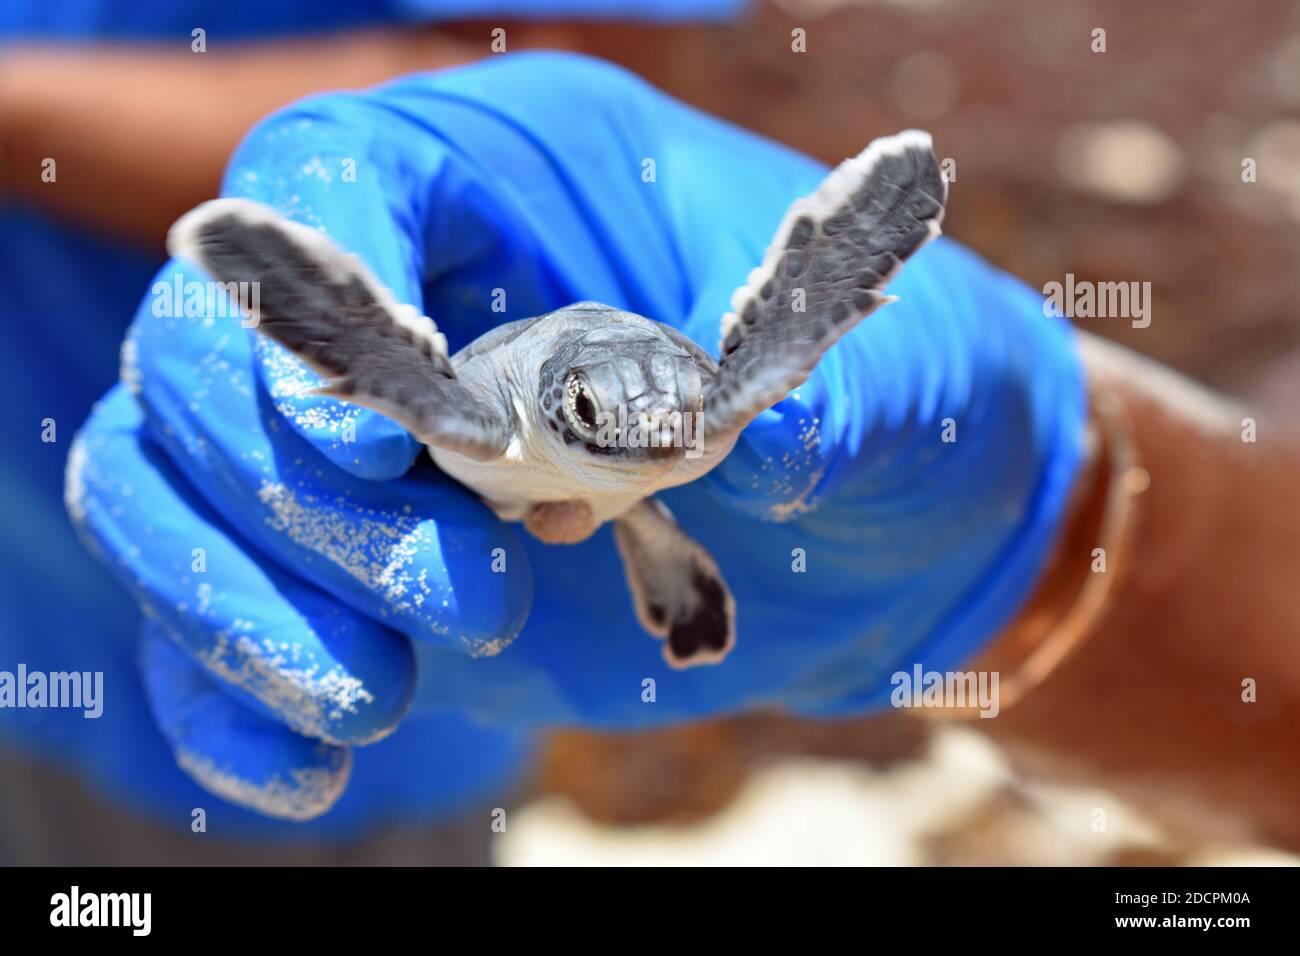 A black male wearing blue plastic gloves holds a green sea turtle hatchling during an eco tour on Cozumel, Mexico.  The turtle has its flippers raised. Stock Photo